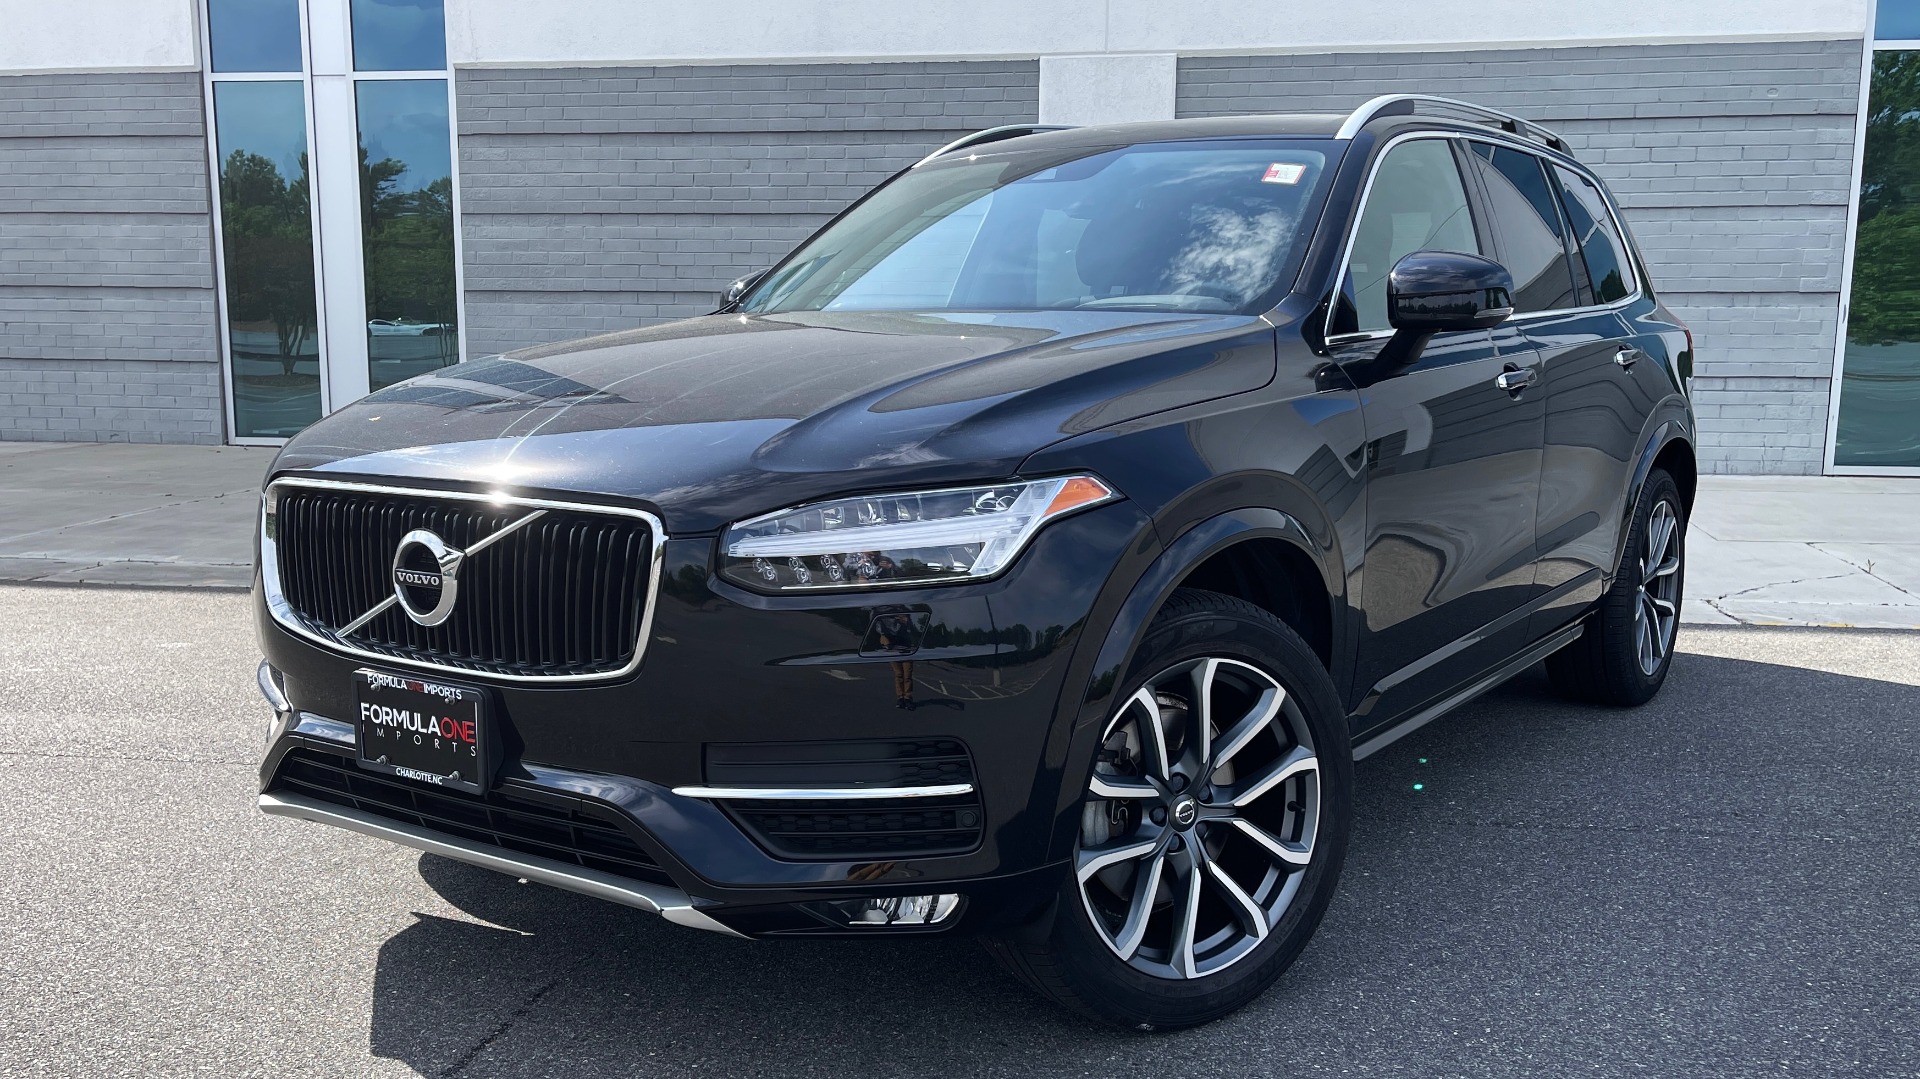 Used 2018 Volvo XC90 T5 AWD MOMENTUM PLUS / NAV / SUNROOF / 3-ROW / REARVIEW for sale Sold at Formula Imports in Charlotte NC 28227 1